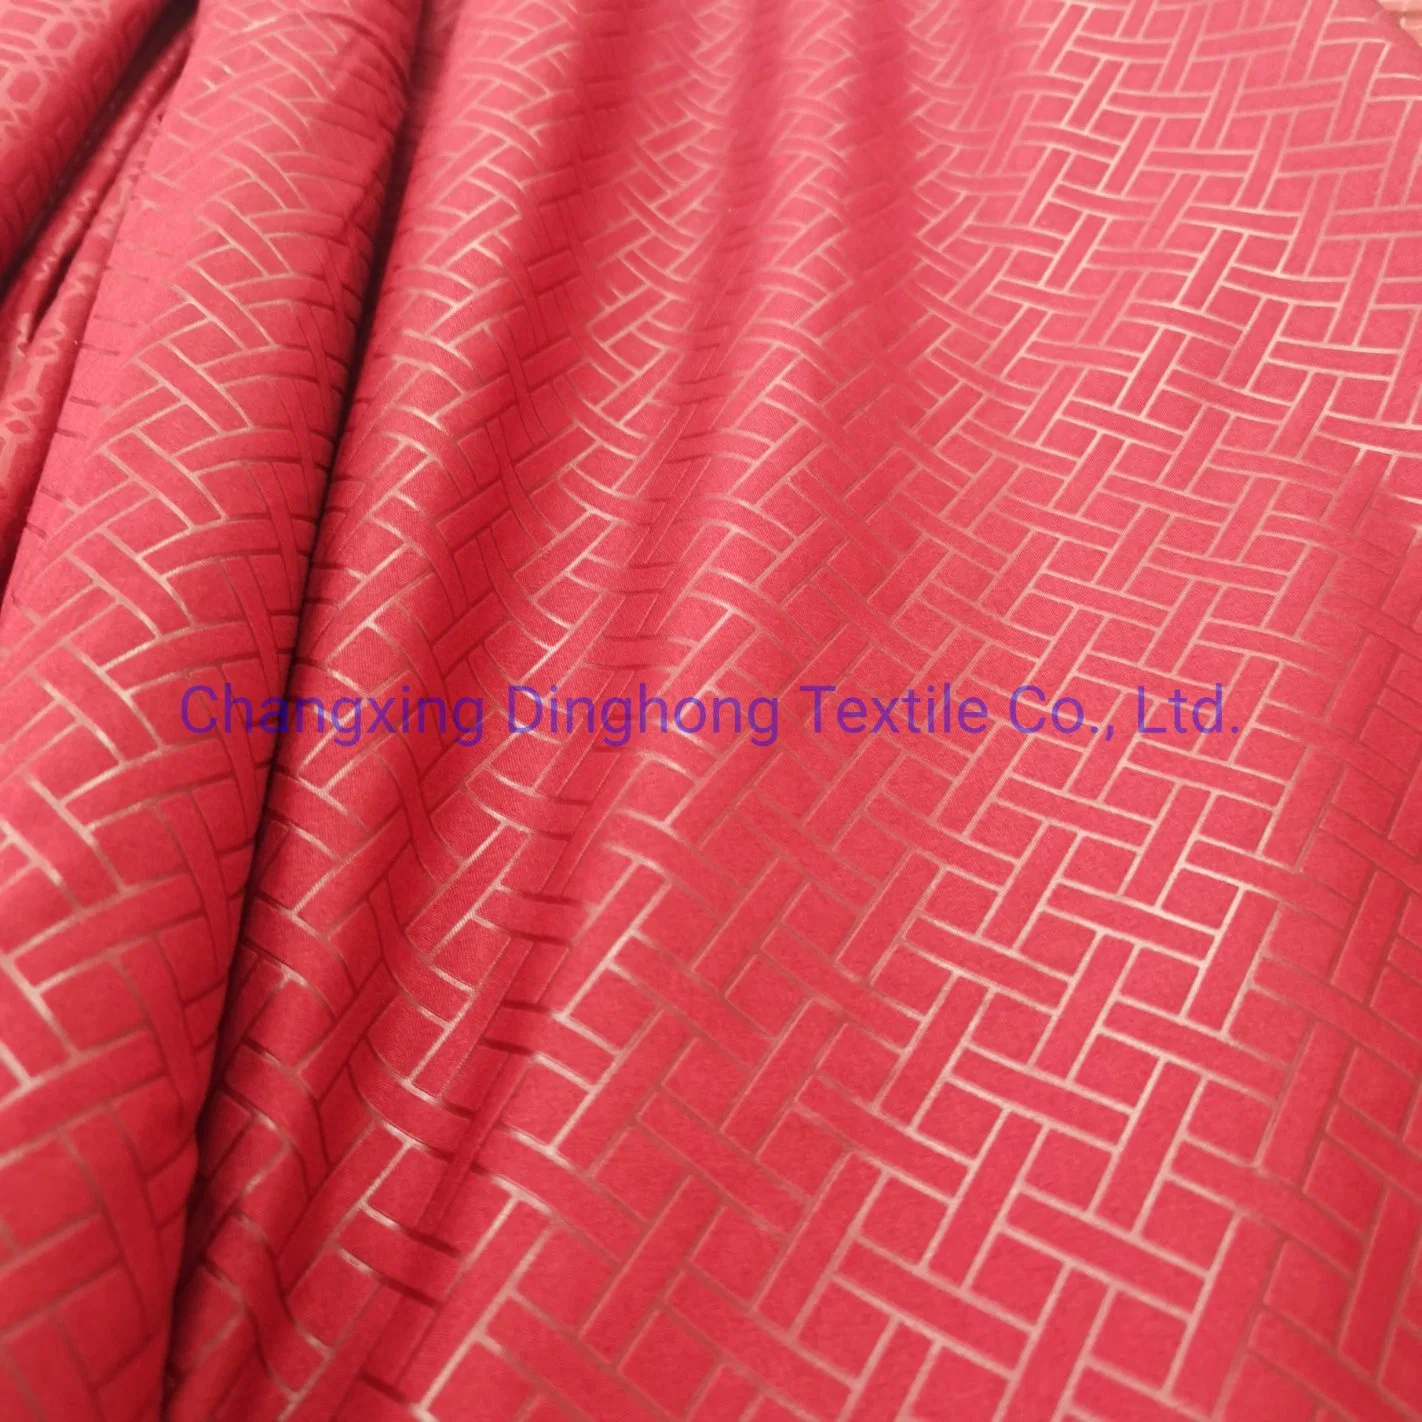 Colorful Polyester Microfiber Embossed Fabric Textile